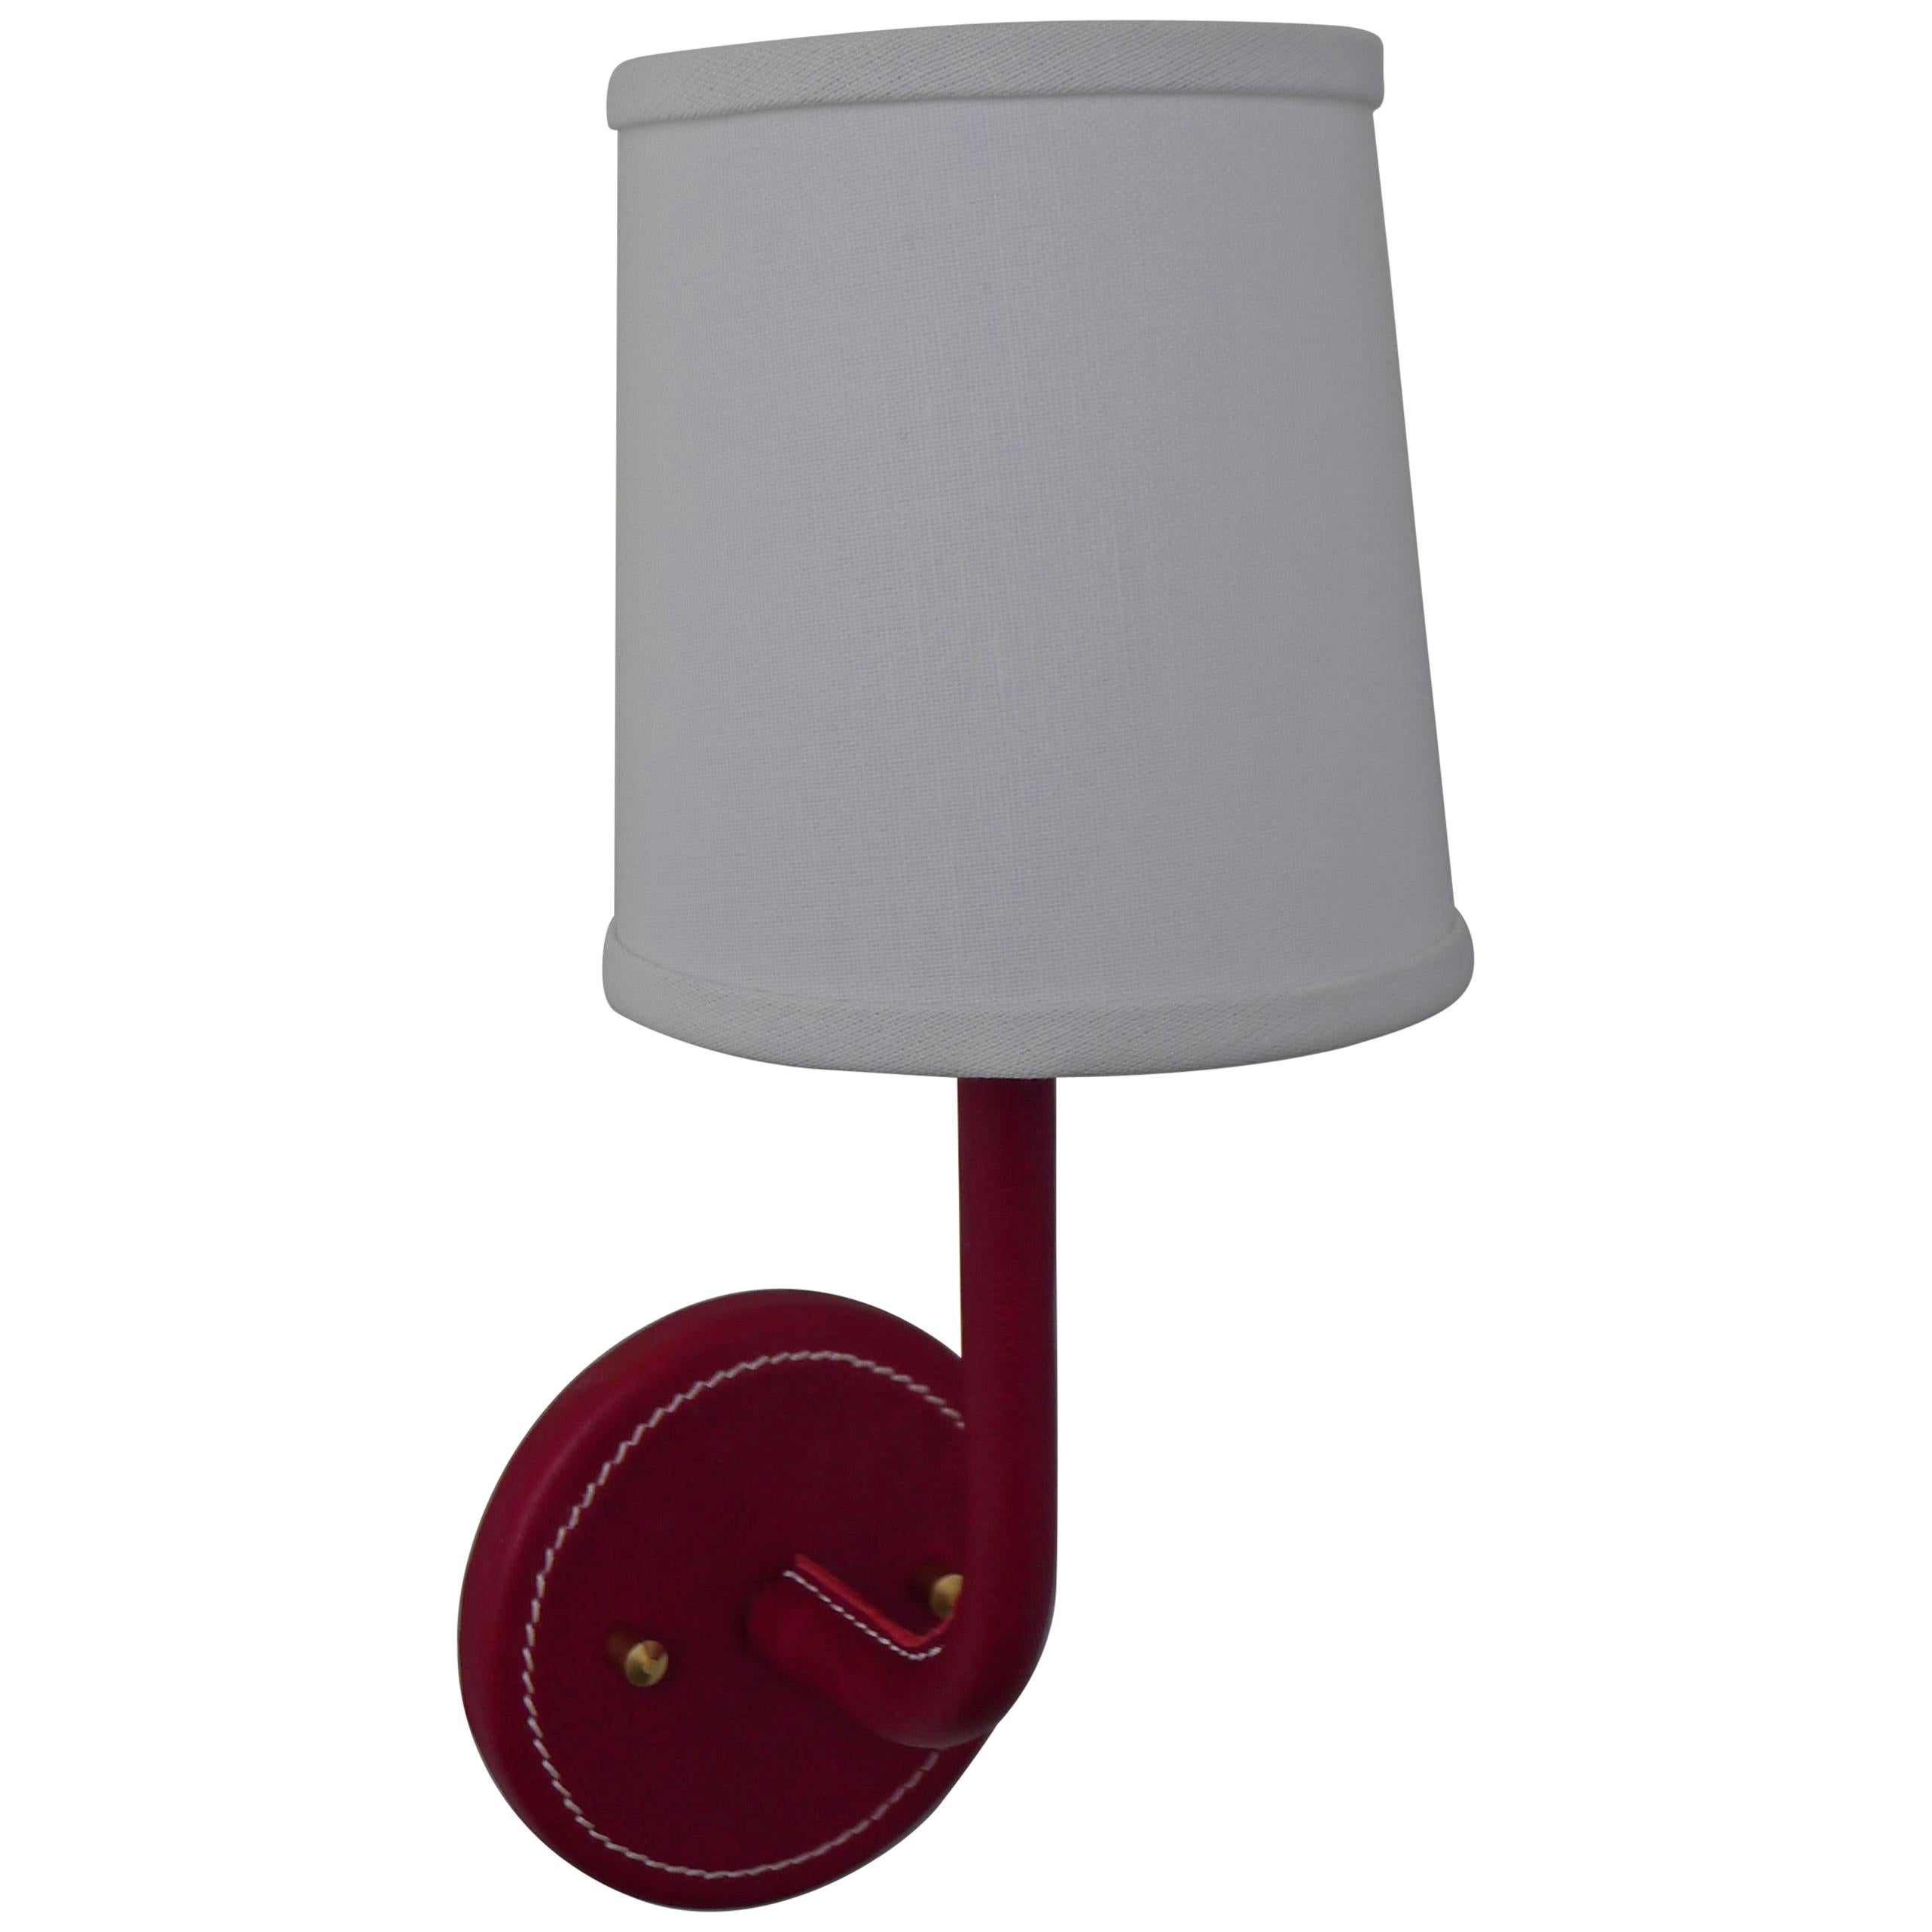 Paul Marra Top-Stitched Leather Wrapped Sconce in Red For Sale